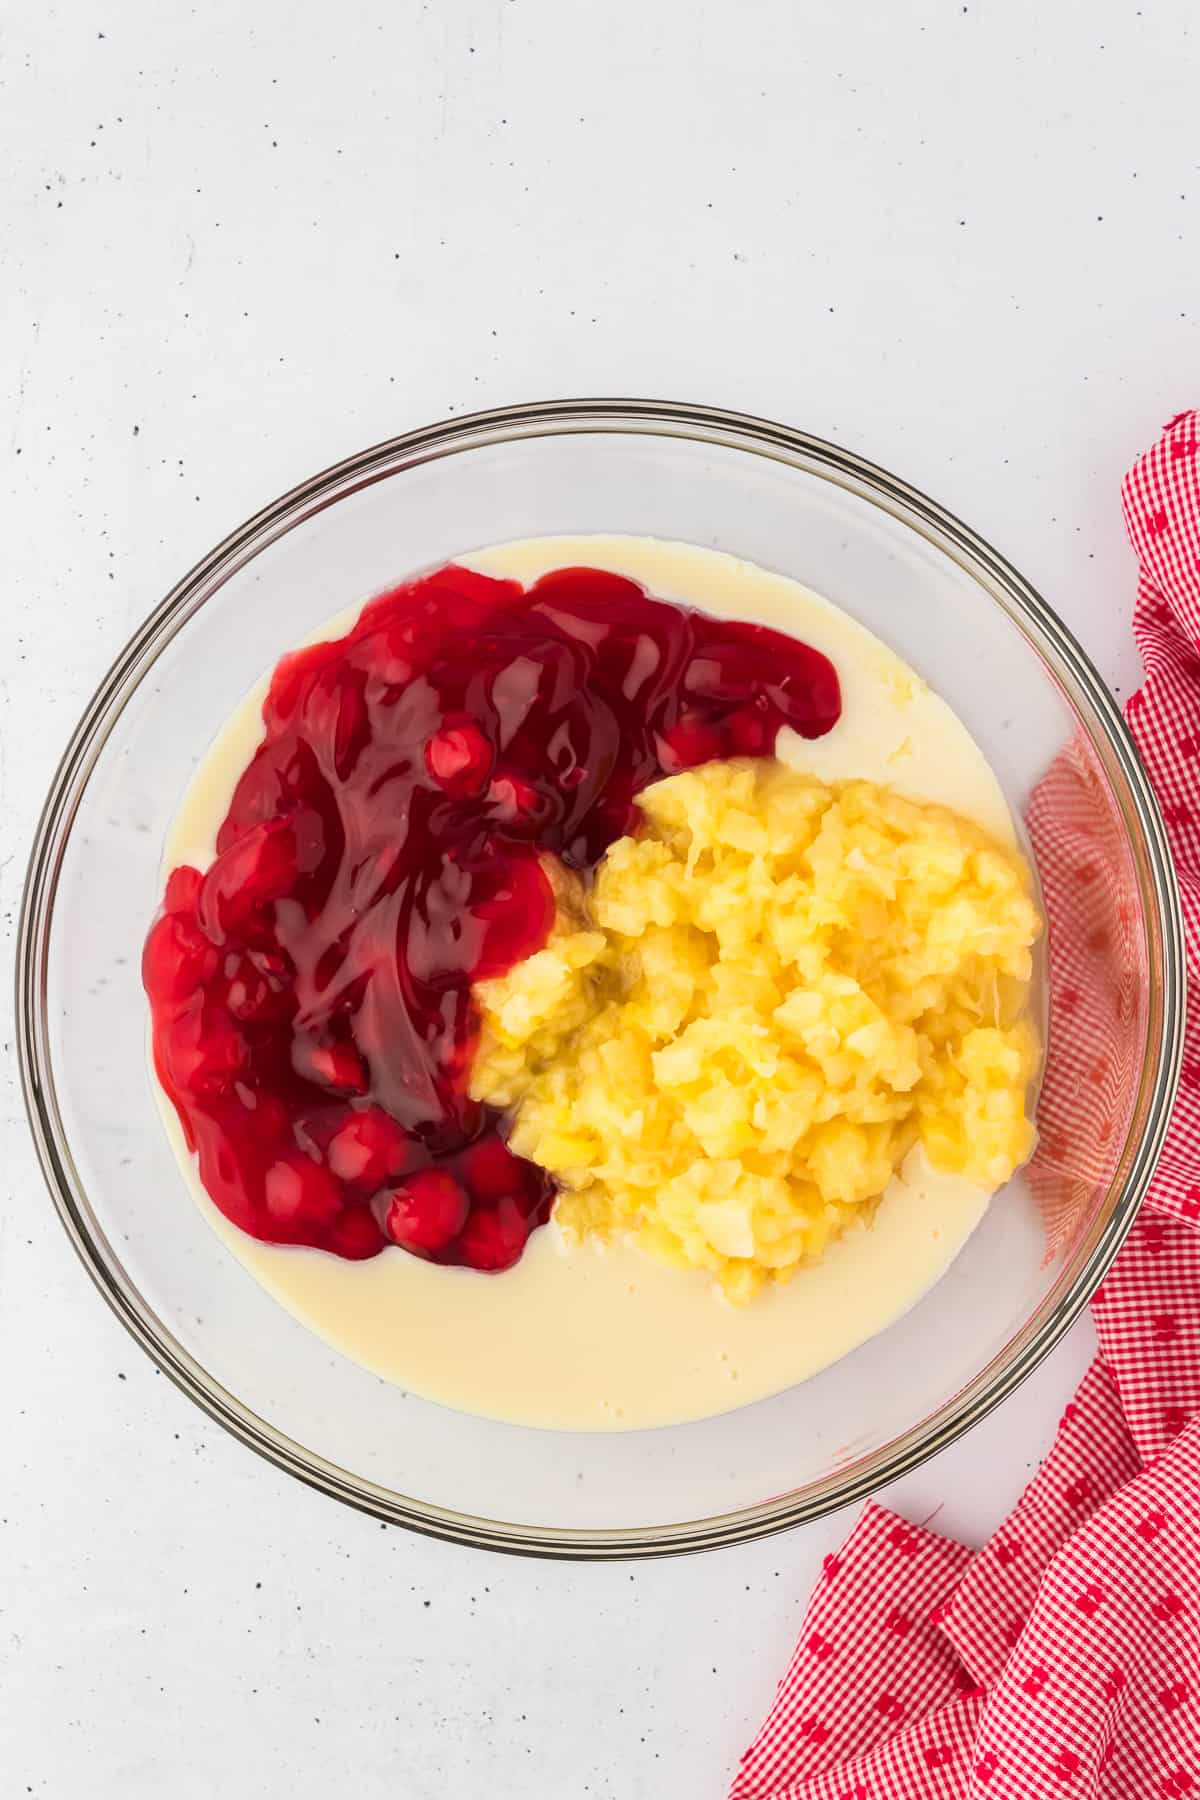 condensed milk, cherry pie filling and crushed pineapple in a clear glass bowl with a red and white kitchen towel to the right of it.